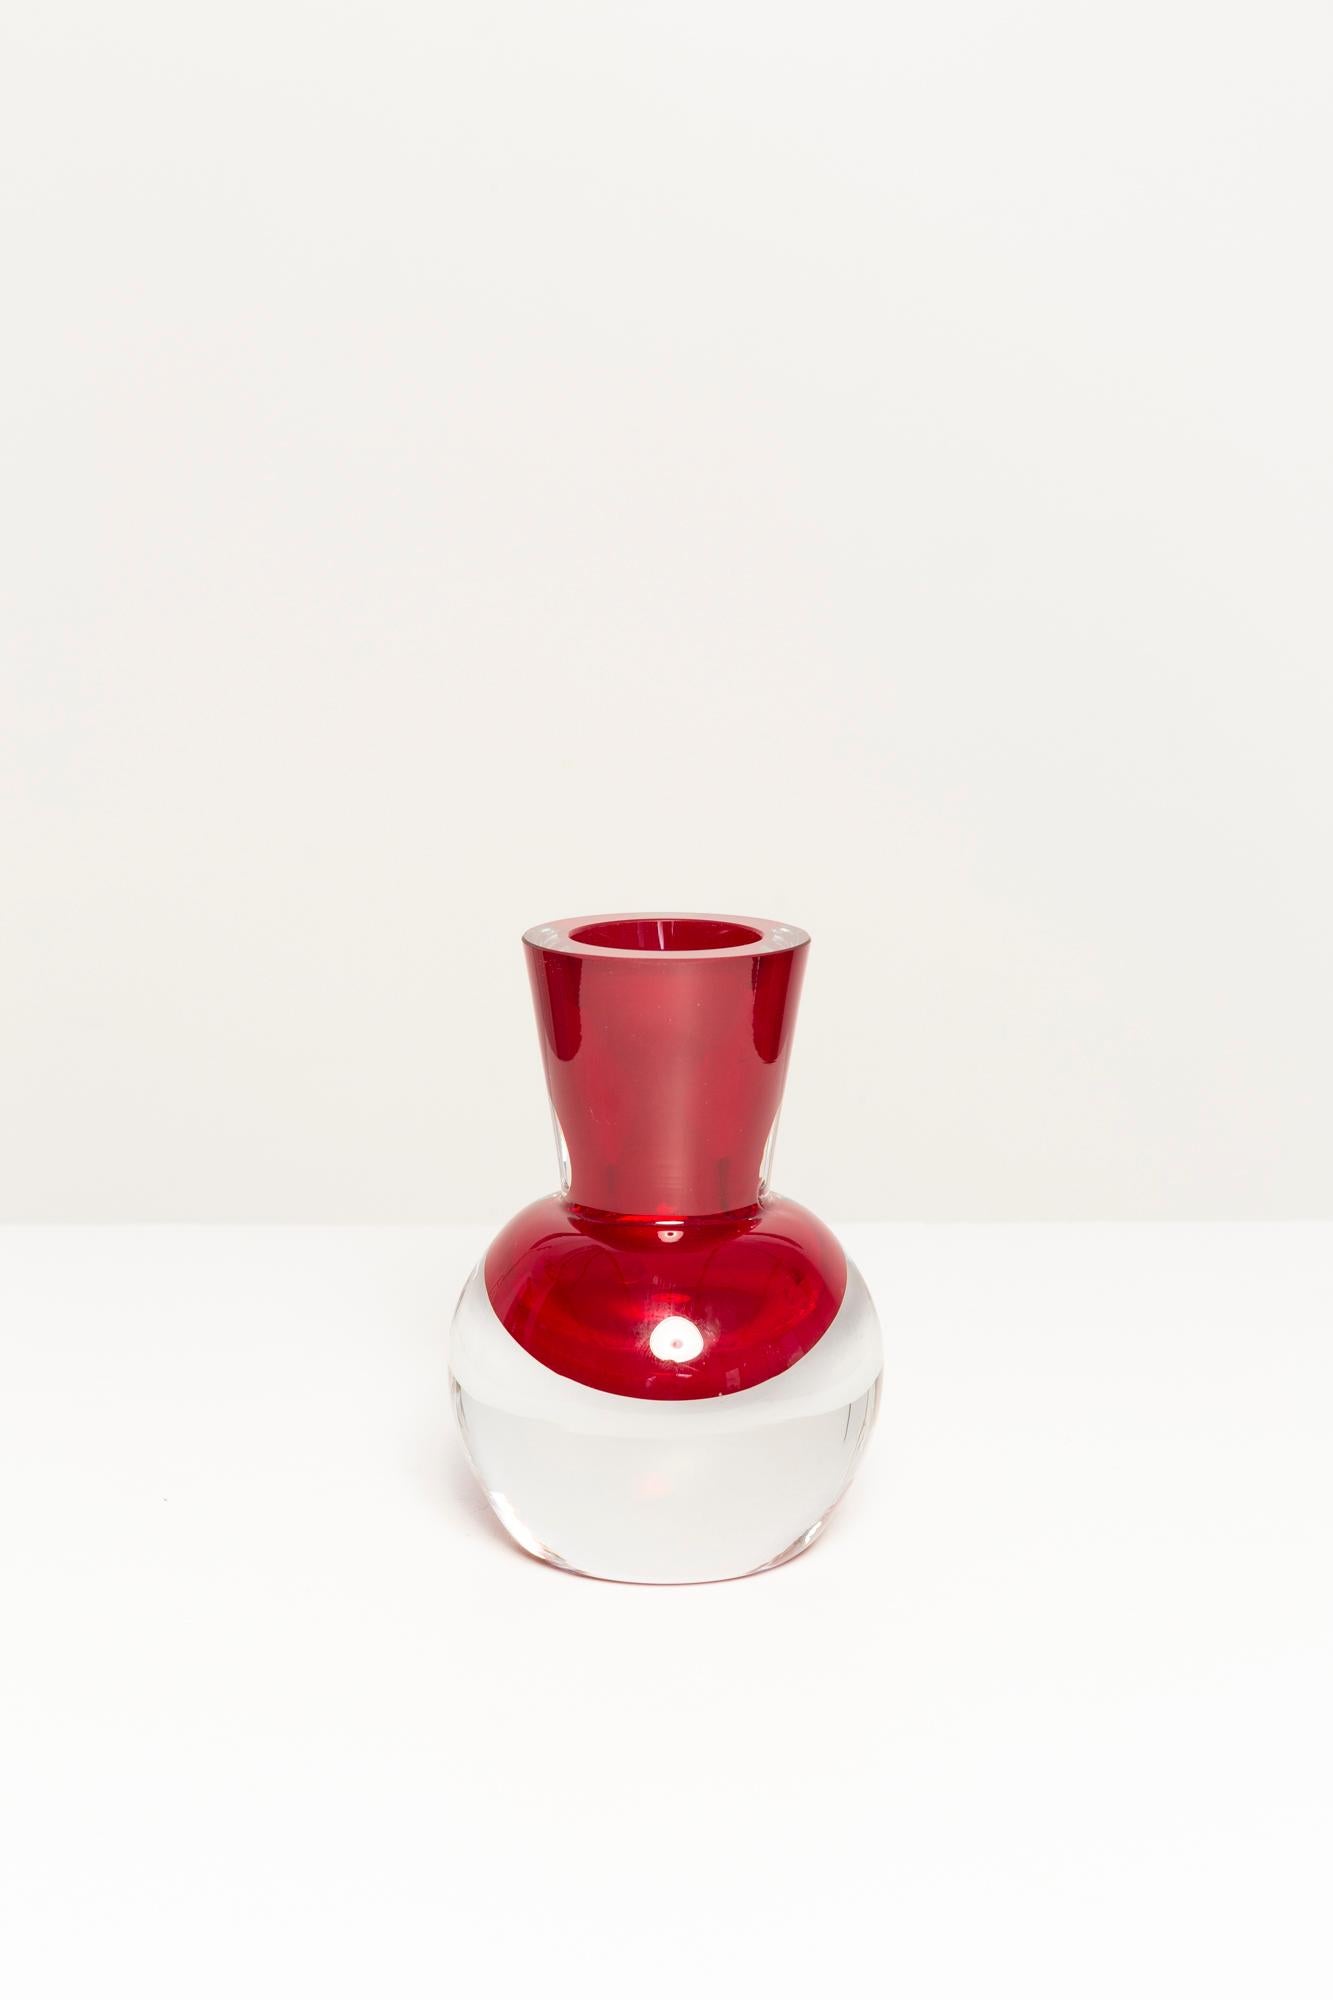 Midcentury Vintage Small Red Decorative Glass Vase, Europe, 1960s For Sale 6